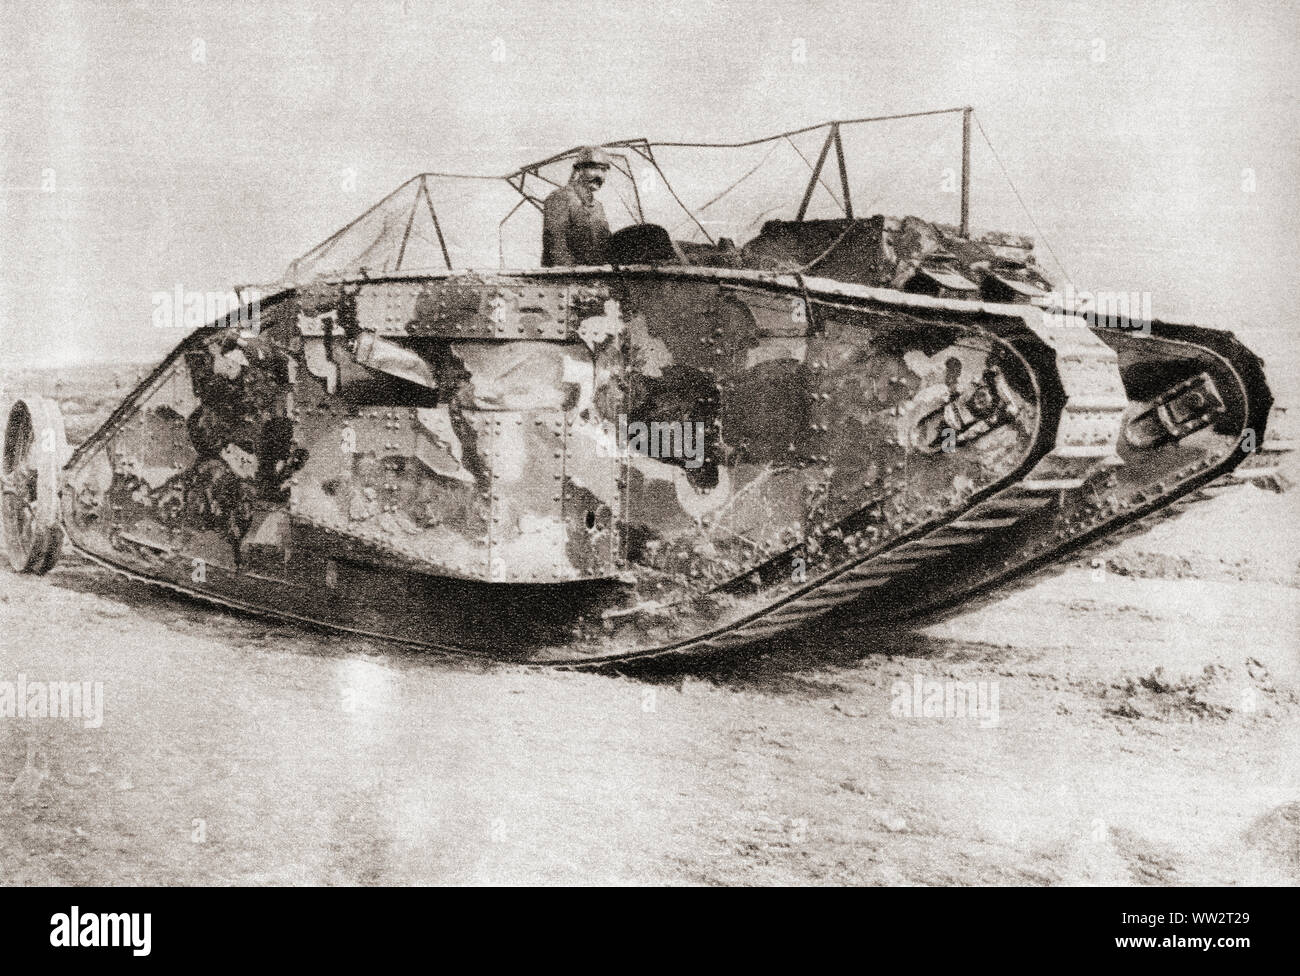 A British Mark I tank in action at the Battle of Flers-Courcelette, fought during the Battle of the Somme in France in 1916 during WWI.  From The Pageant of the Century, published 1934. Stock Photo